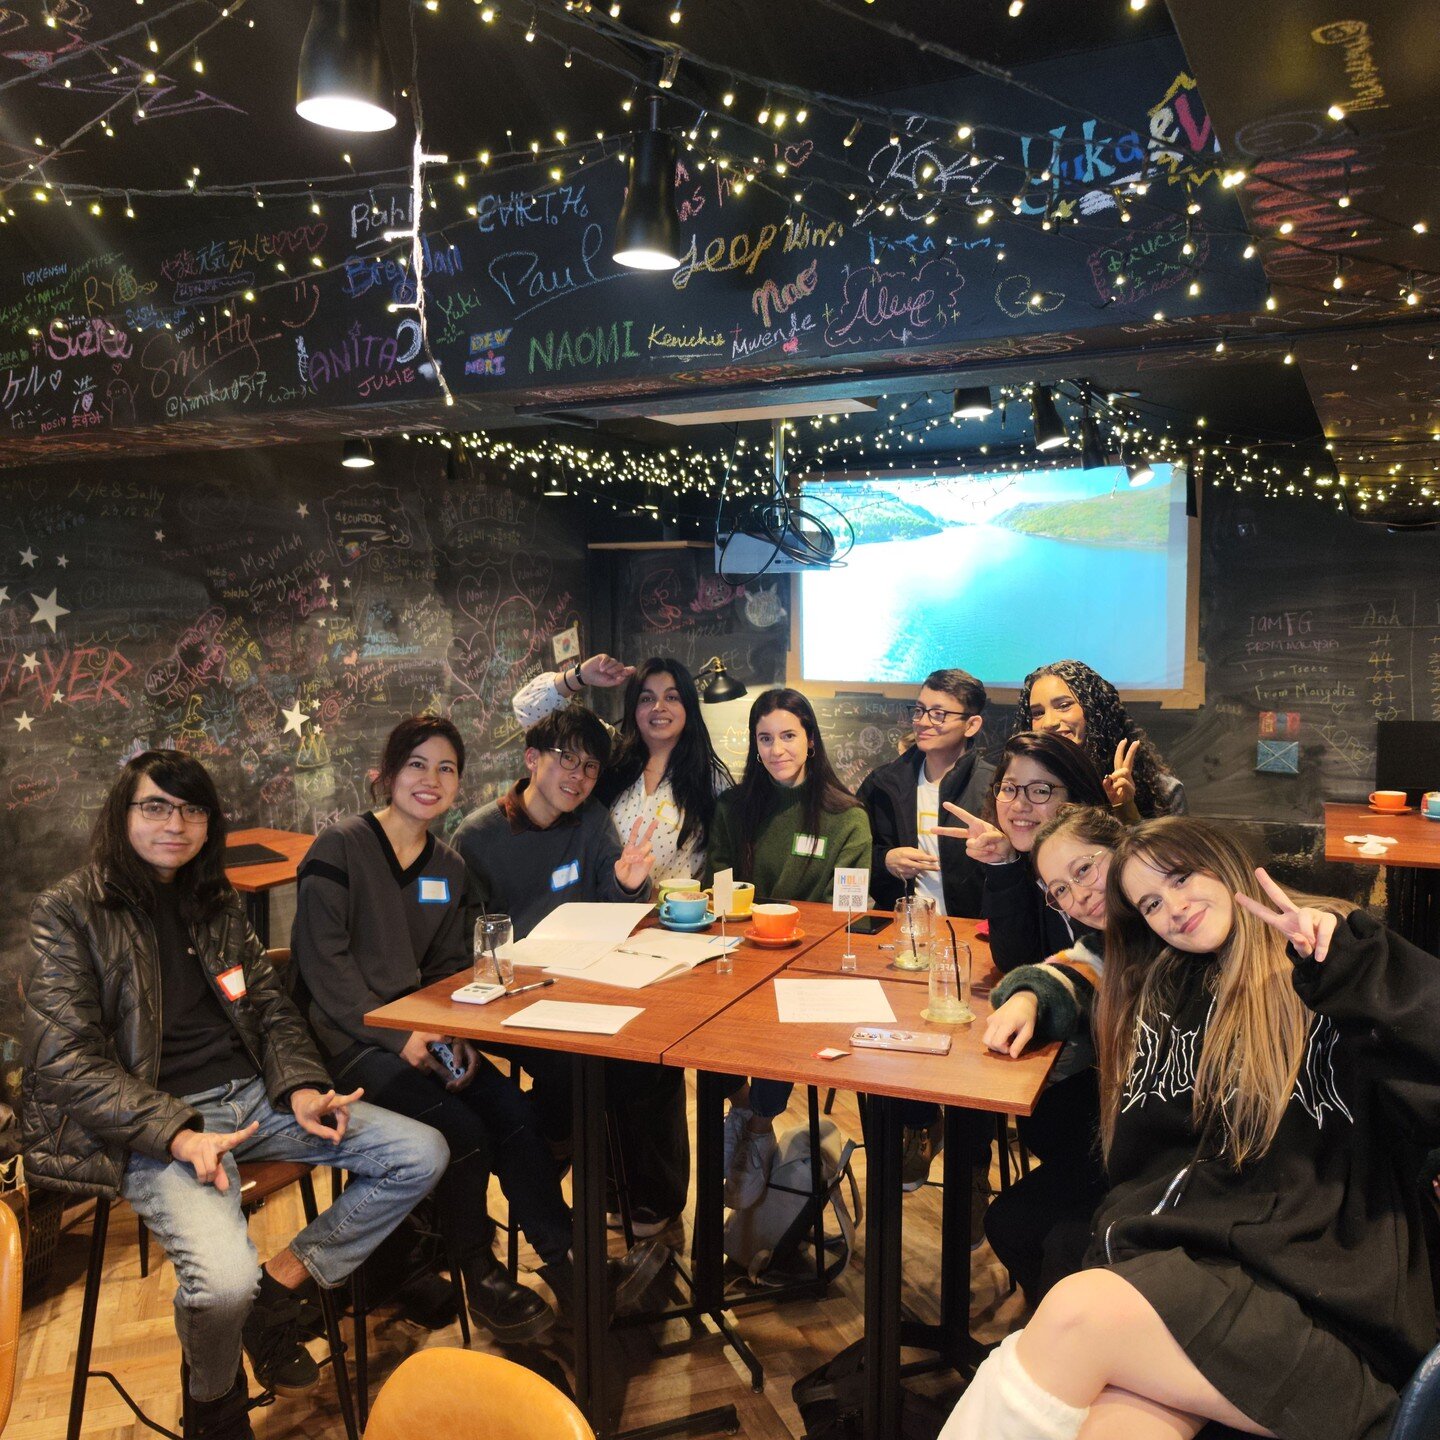 Thank you for coming to last week's Spanish and Japanese Language Exchange! &hearts;️

Our next event will be this Saturday same time! If you weren't/aren't able to make Tuesday nights, how about Saturday night?✌️
Please sign up using the link in our